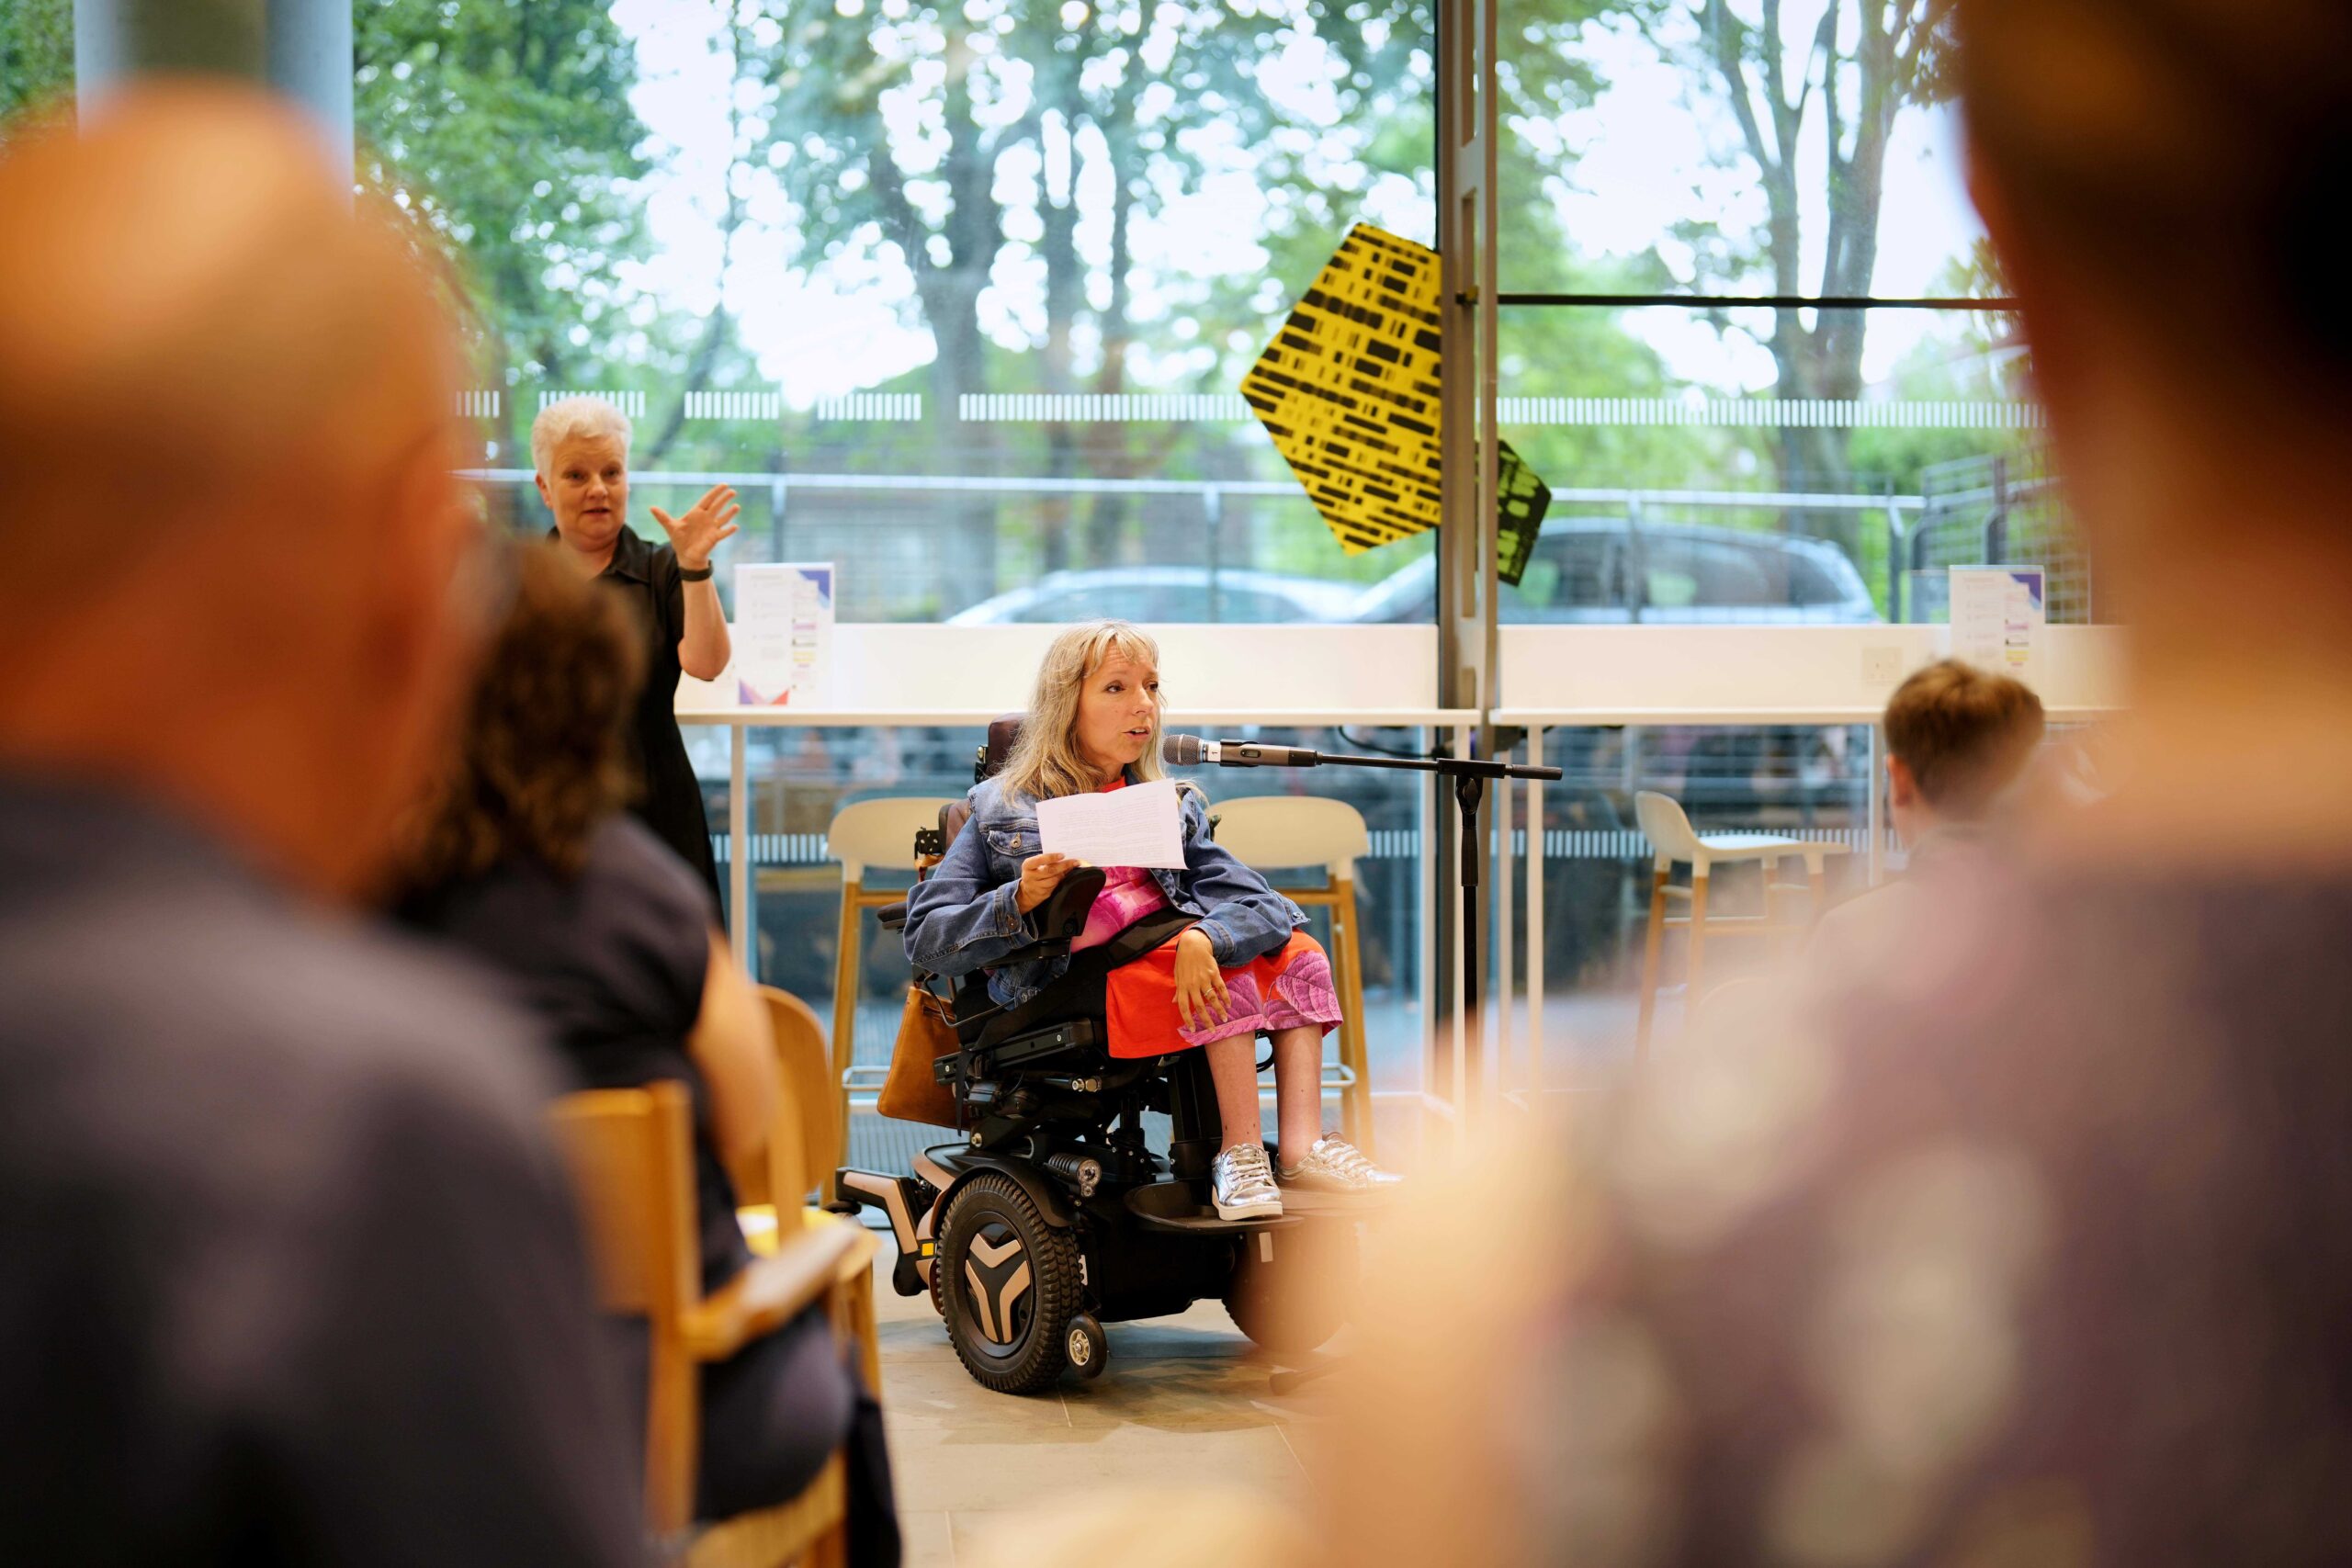 ows of people seated with their backs to the camera and facing towards Esther who is making a speech seated in her wheelchair. There is a large window behind her. Esther is a white woman in her late 40â€™s with mid-length blonde-grey hair, wearing a denim jacket over the top of a pink and orange t-shirt dress with silver shoes.